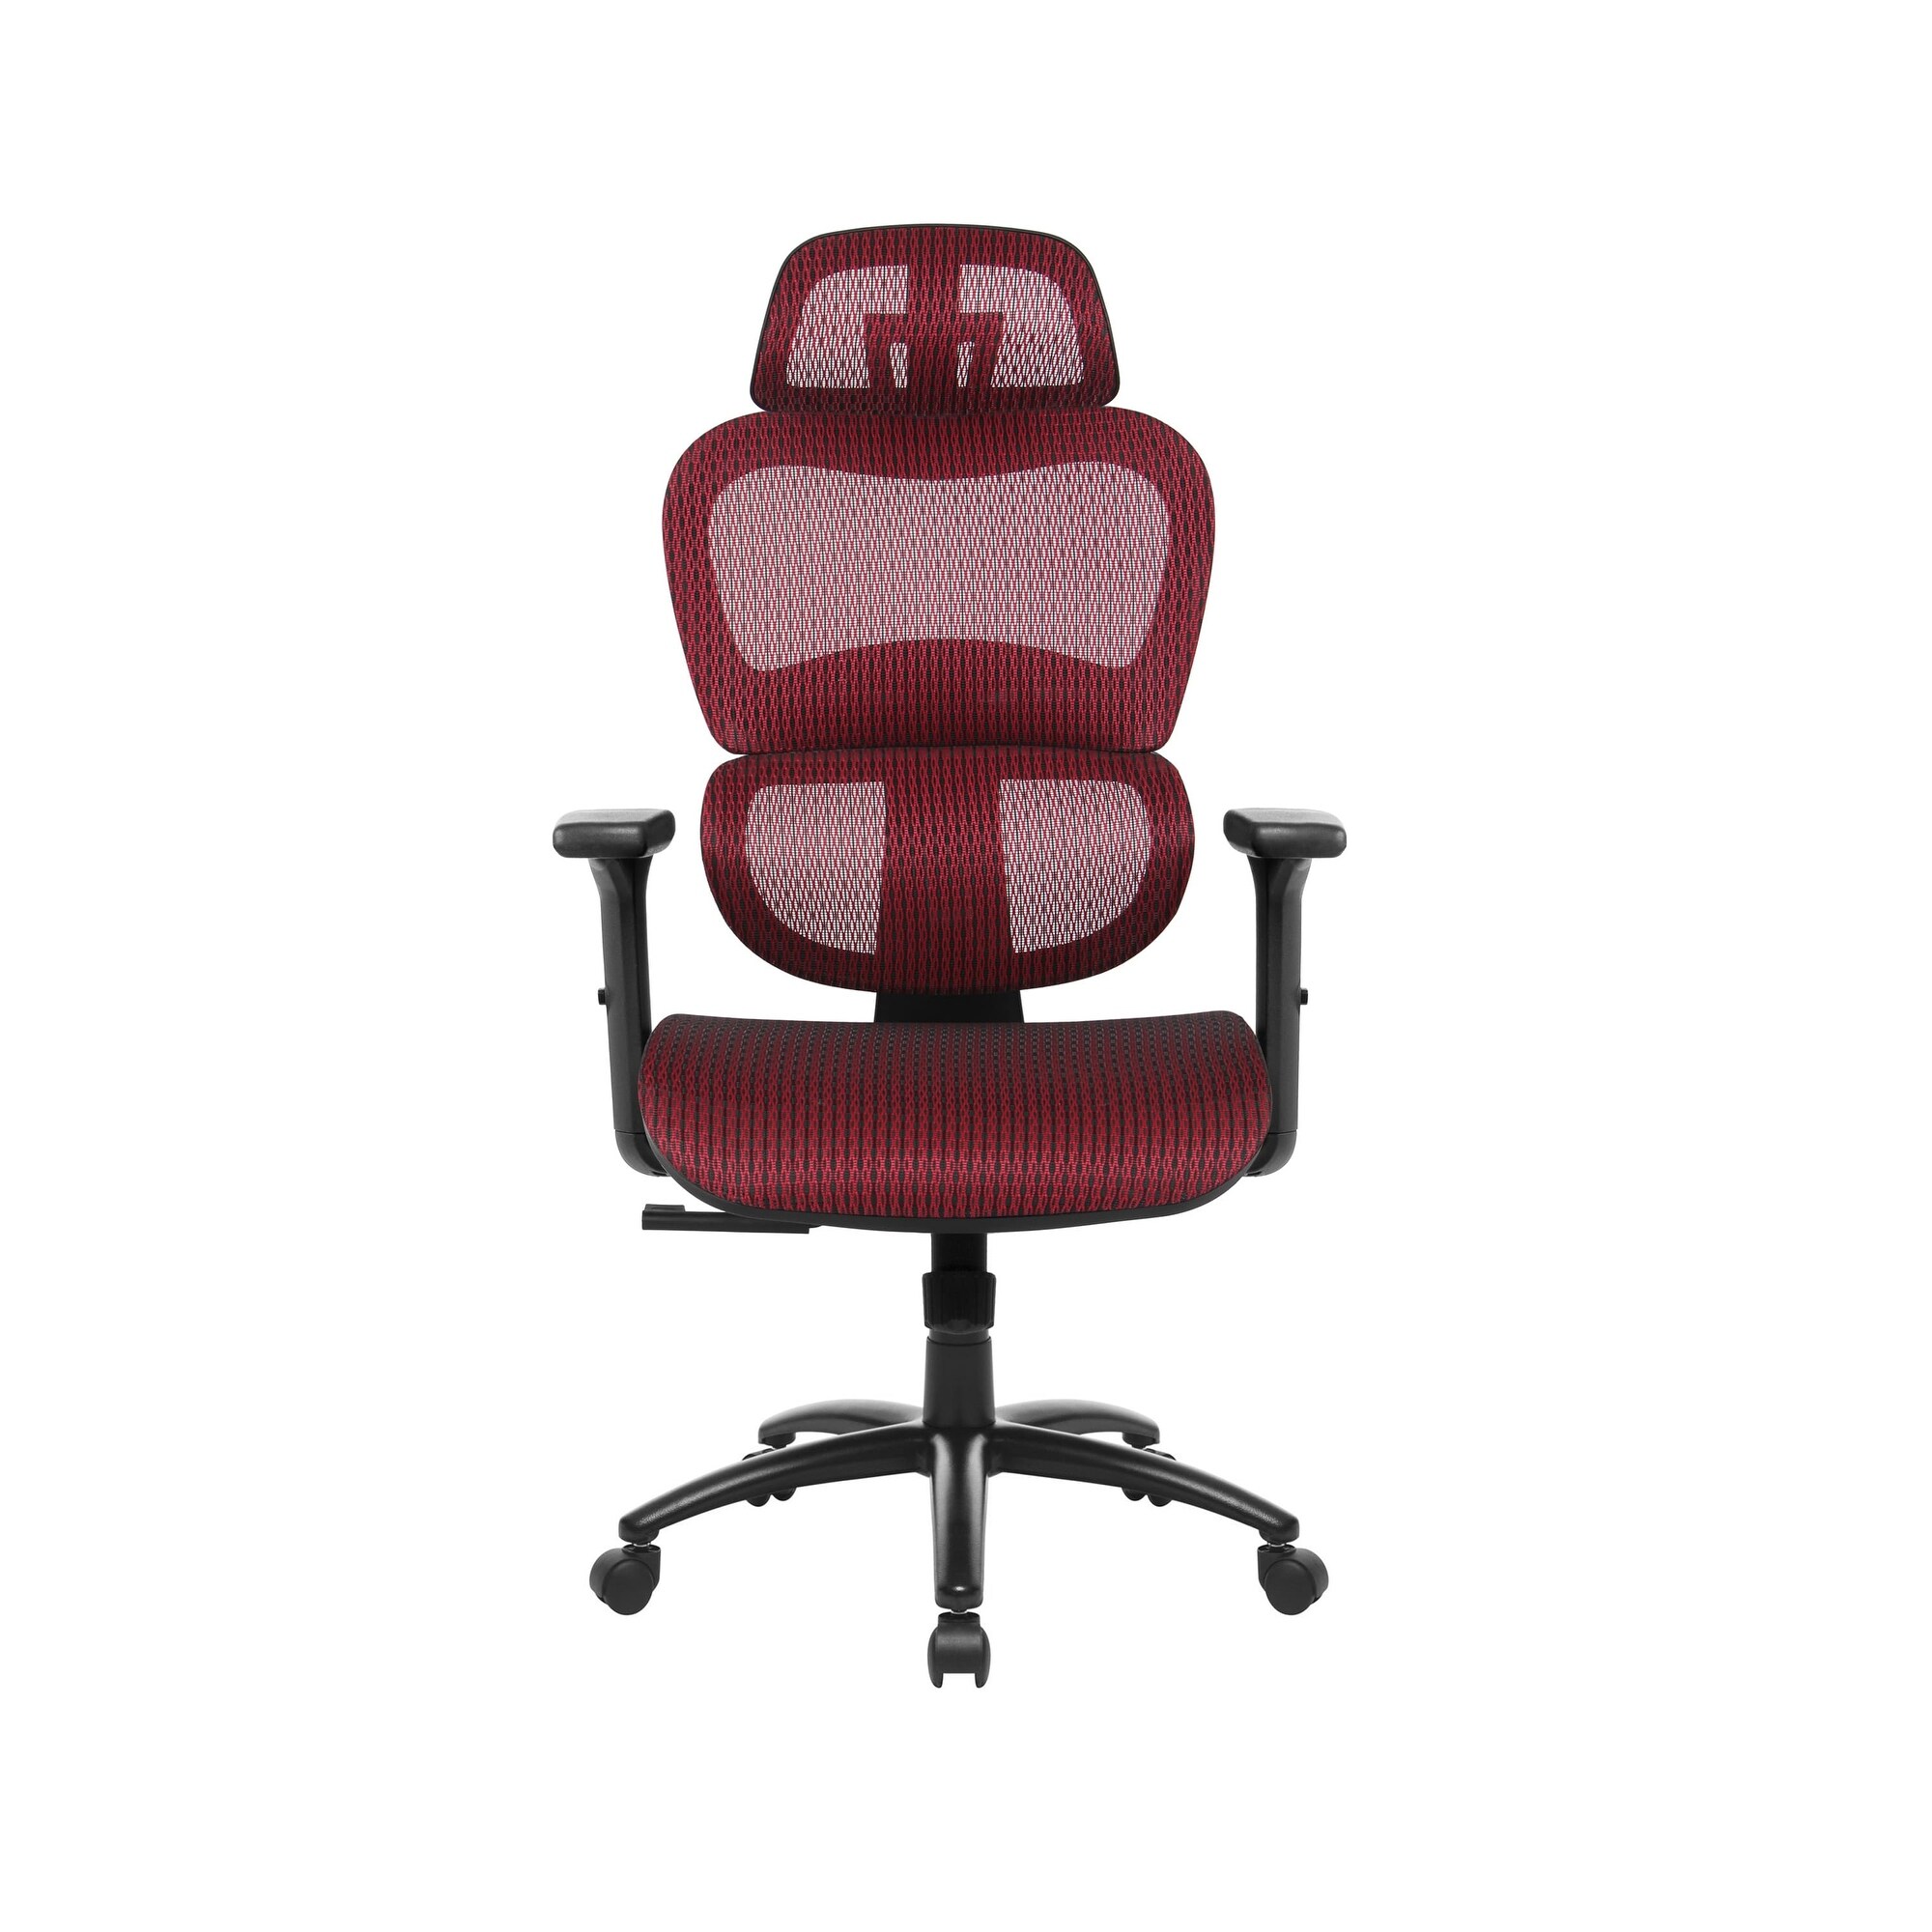 https://ak1.ostkcdn.com/images/products/is/images/direct/48c1f54f007831a345abd8887f65d4fbd1757827/Office-Chair-Ergonomic-Mesh-High-Back-Desk-Chair-with-3D-Arms-Deluxe-Computer-Chair-with-Adjustable-Height-And-Tilt.jpg